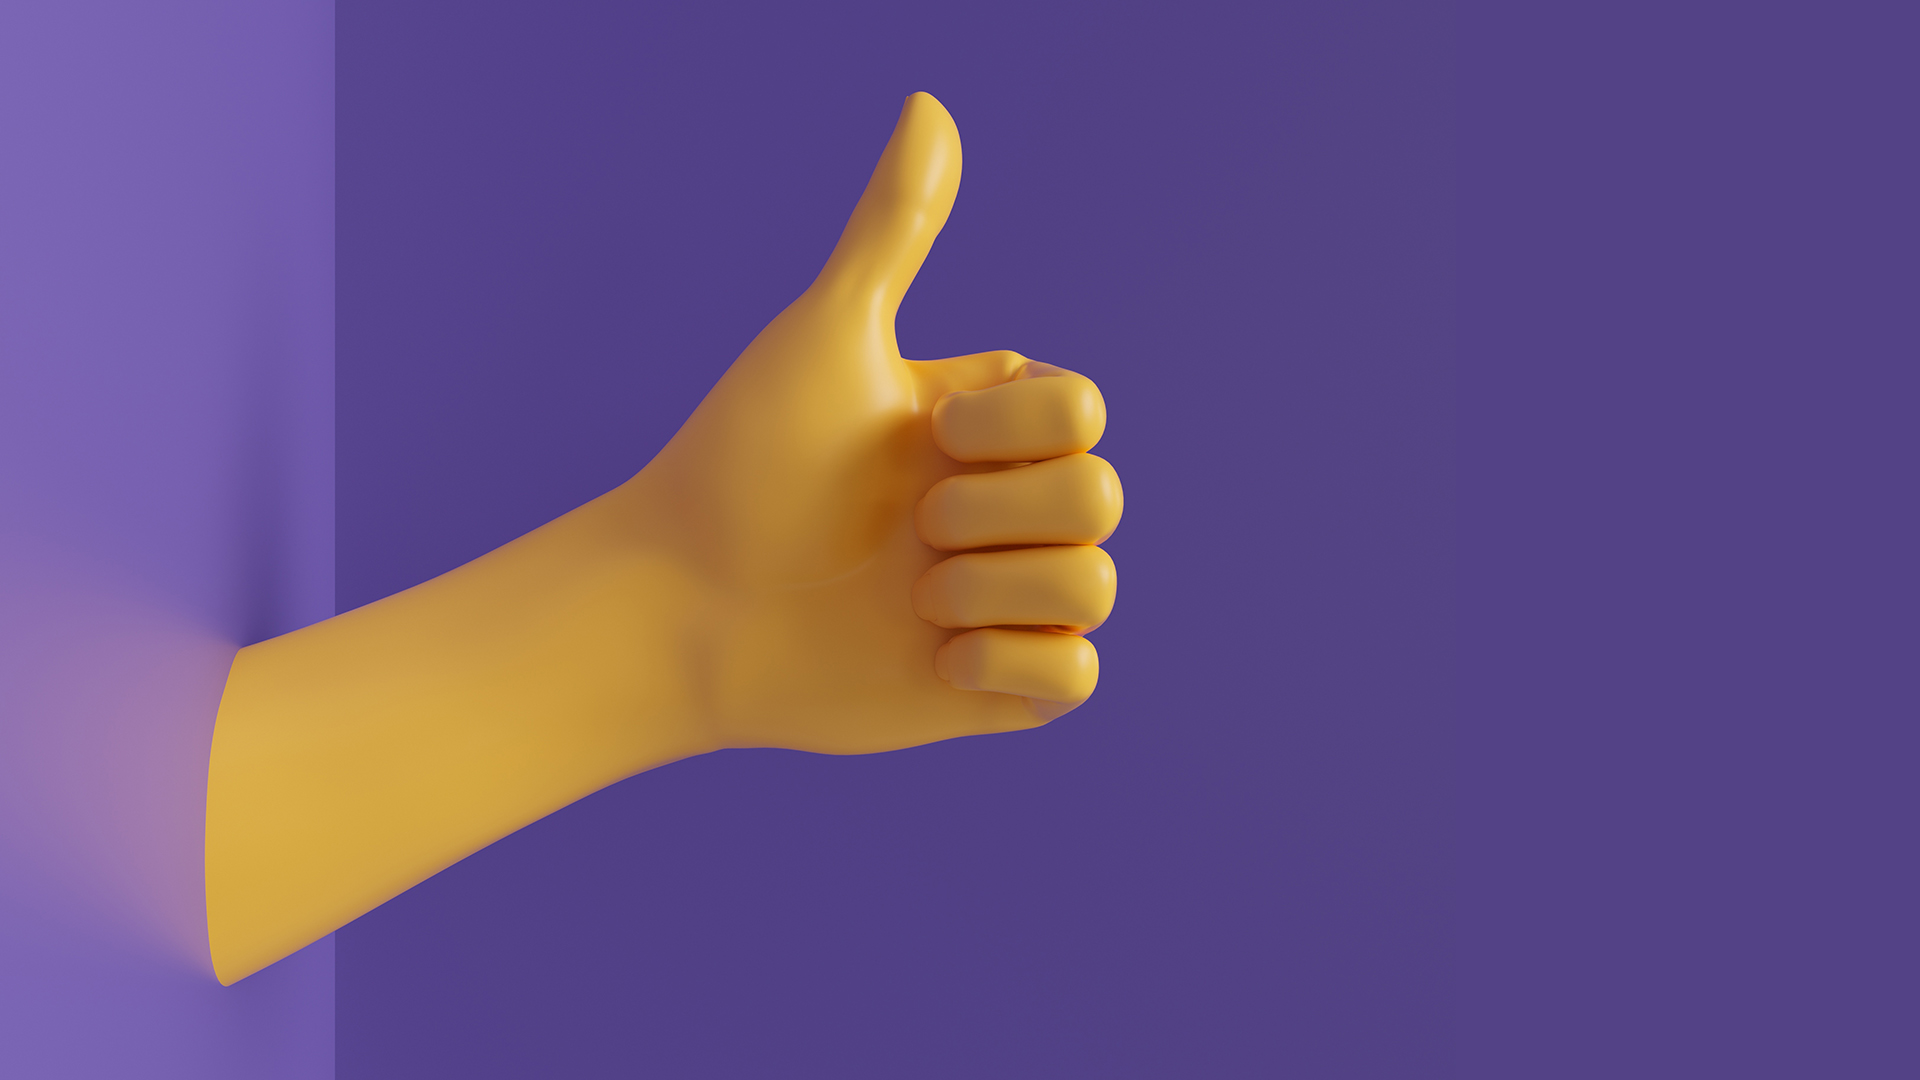 Yellow hand with thumbs up coming out of a purple wall